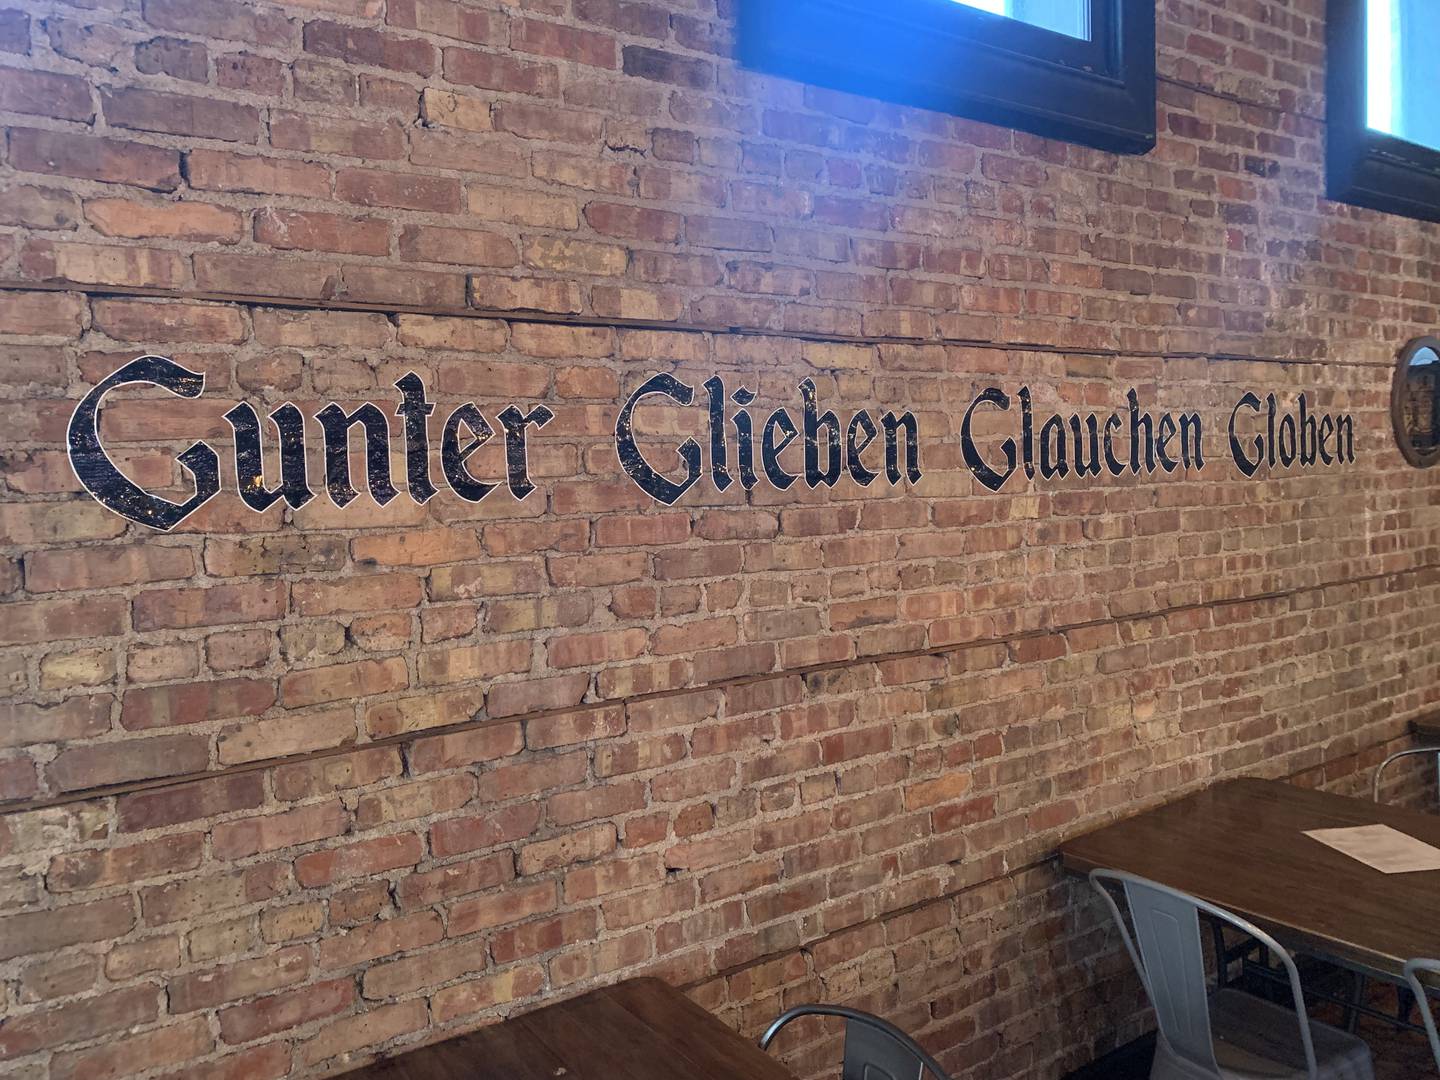 The words “Gunter Gleiben Glauchen Globen” from Def Leppard’s 1980s hit “Rock of Ages” are painted on a brick wall at Richmond Brat Haus.